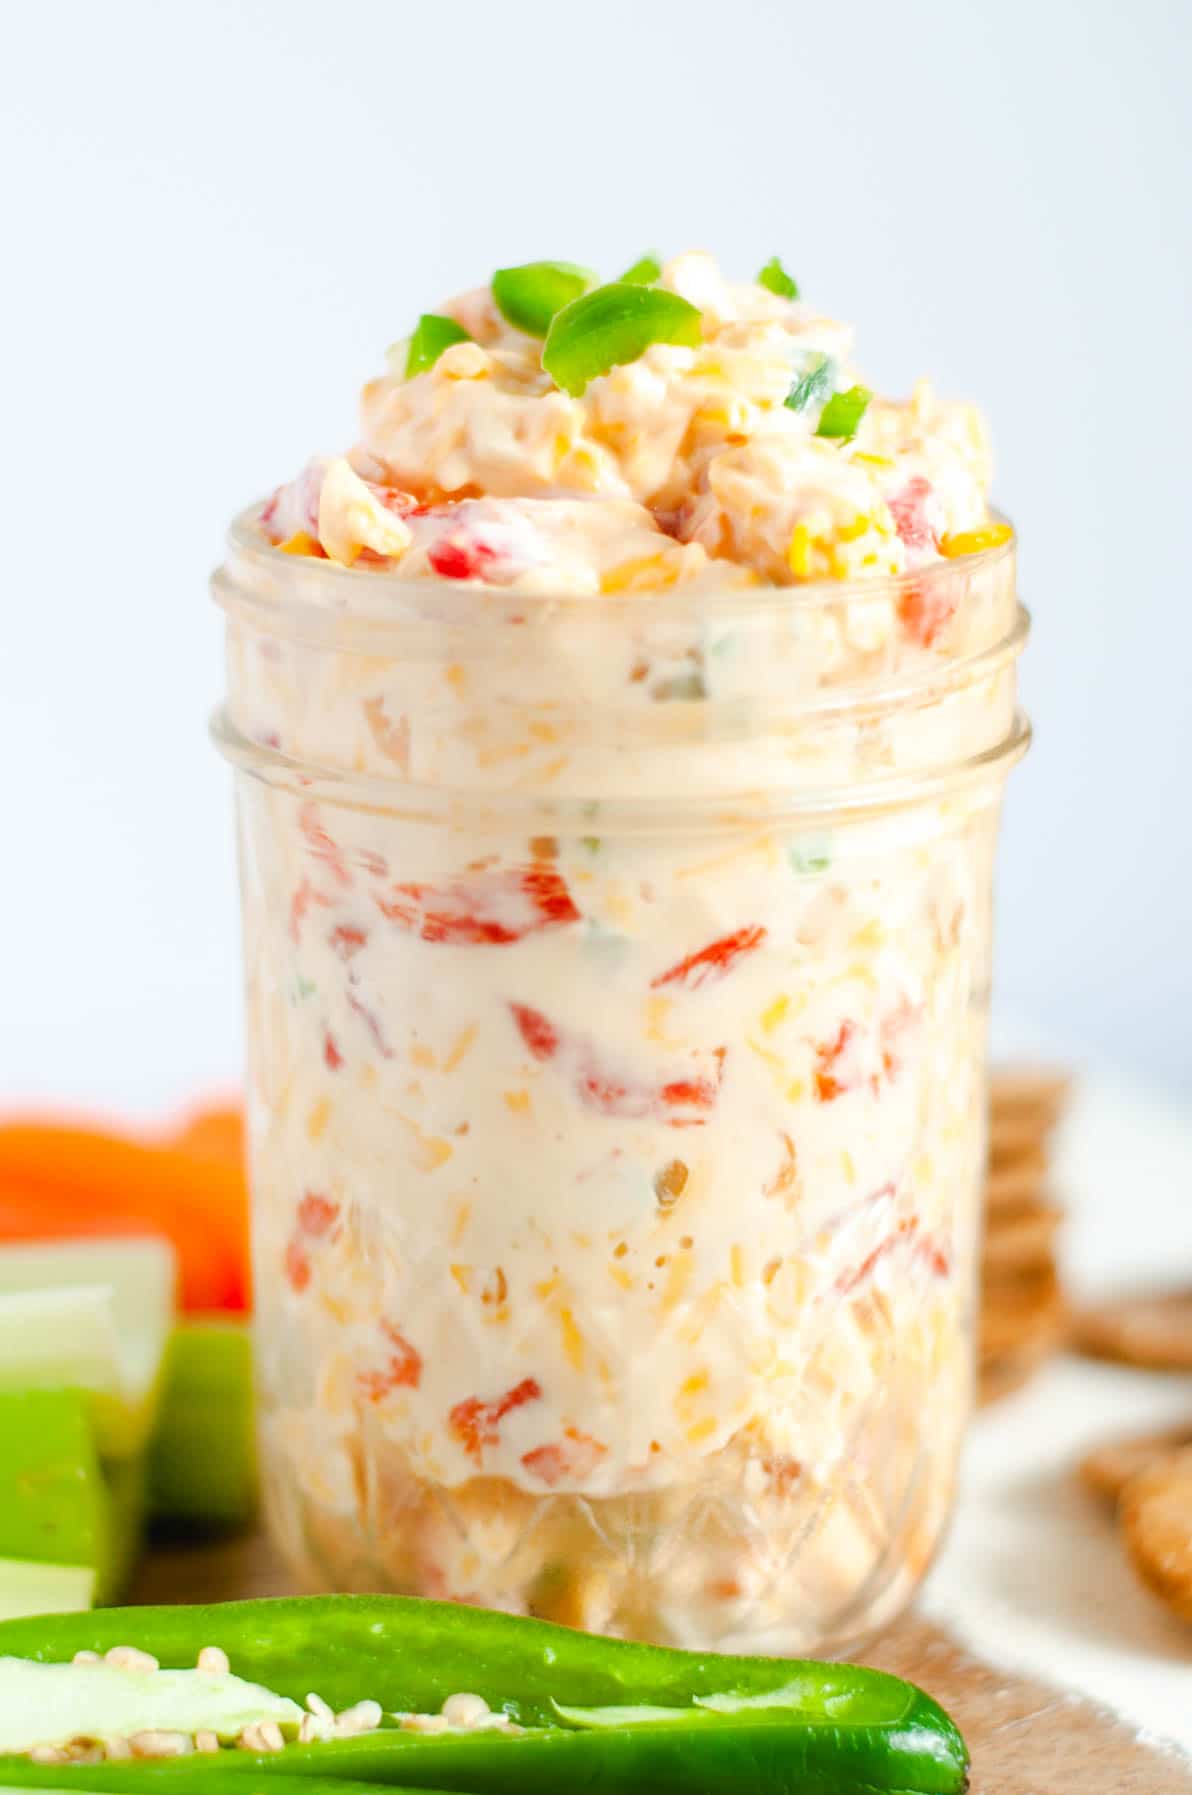 Side view of pint sized glass ball jar filled to the top with pimento cheese